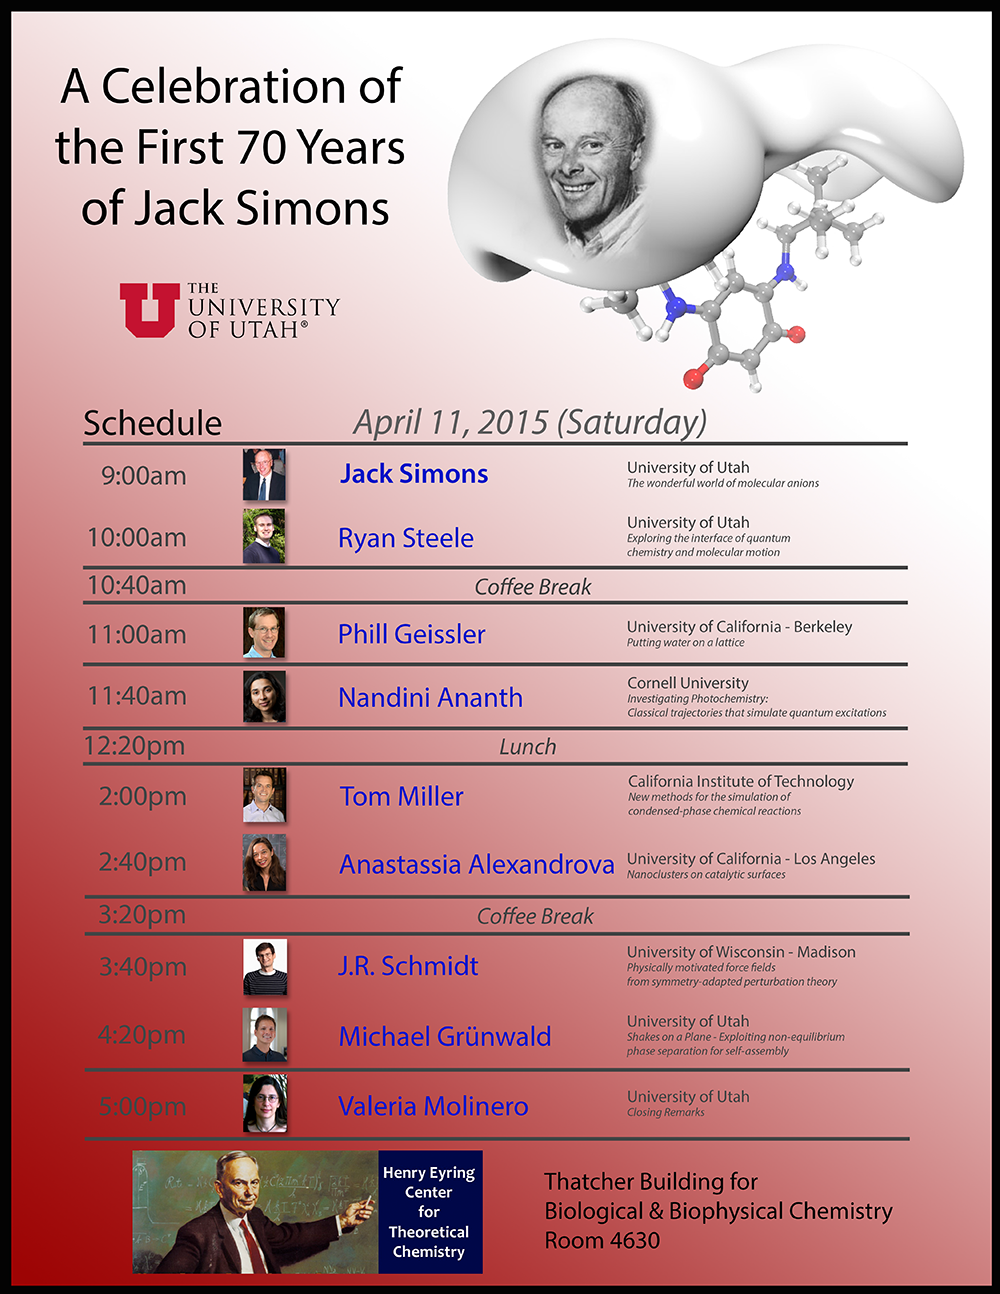 schedule for jack simons' symposium